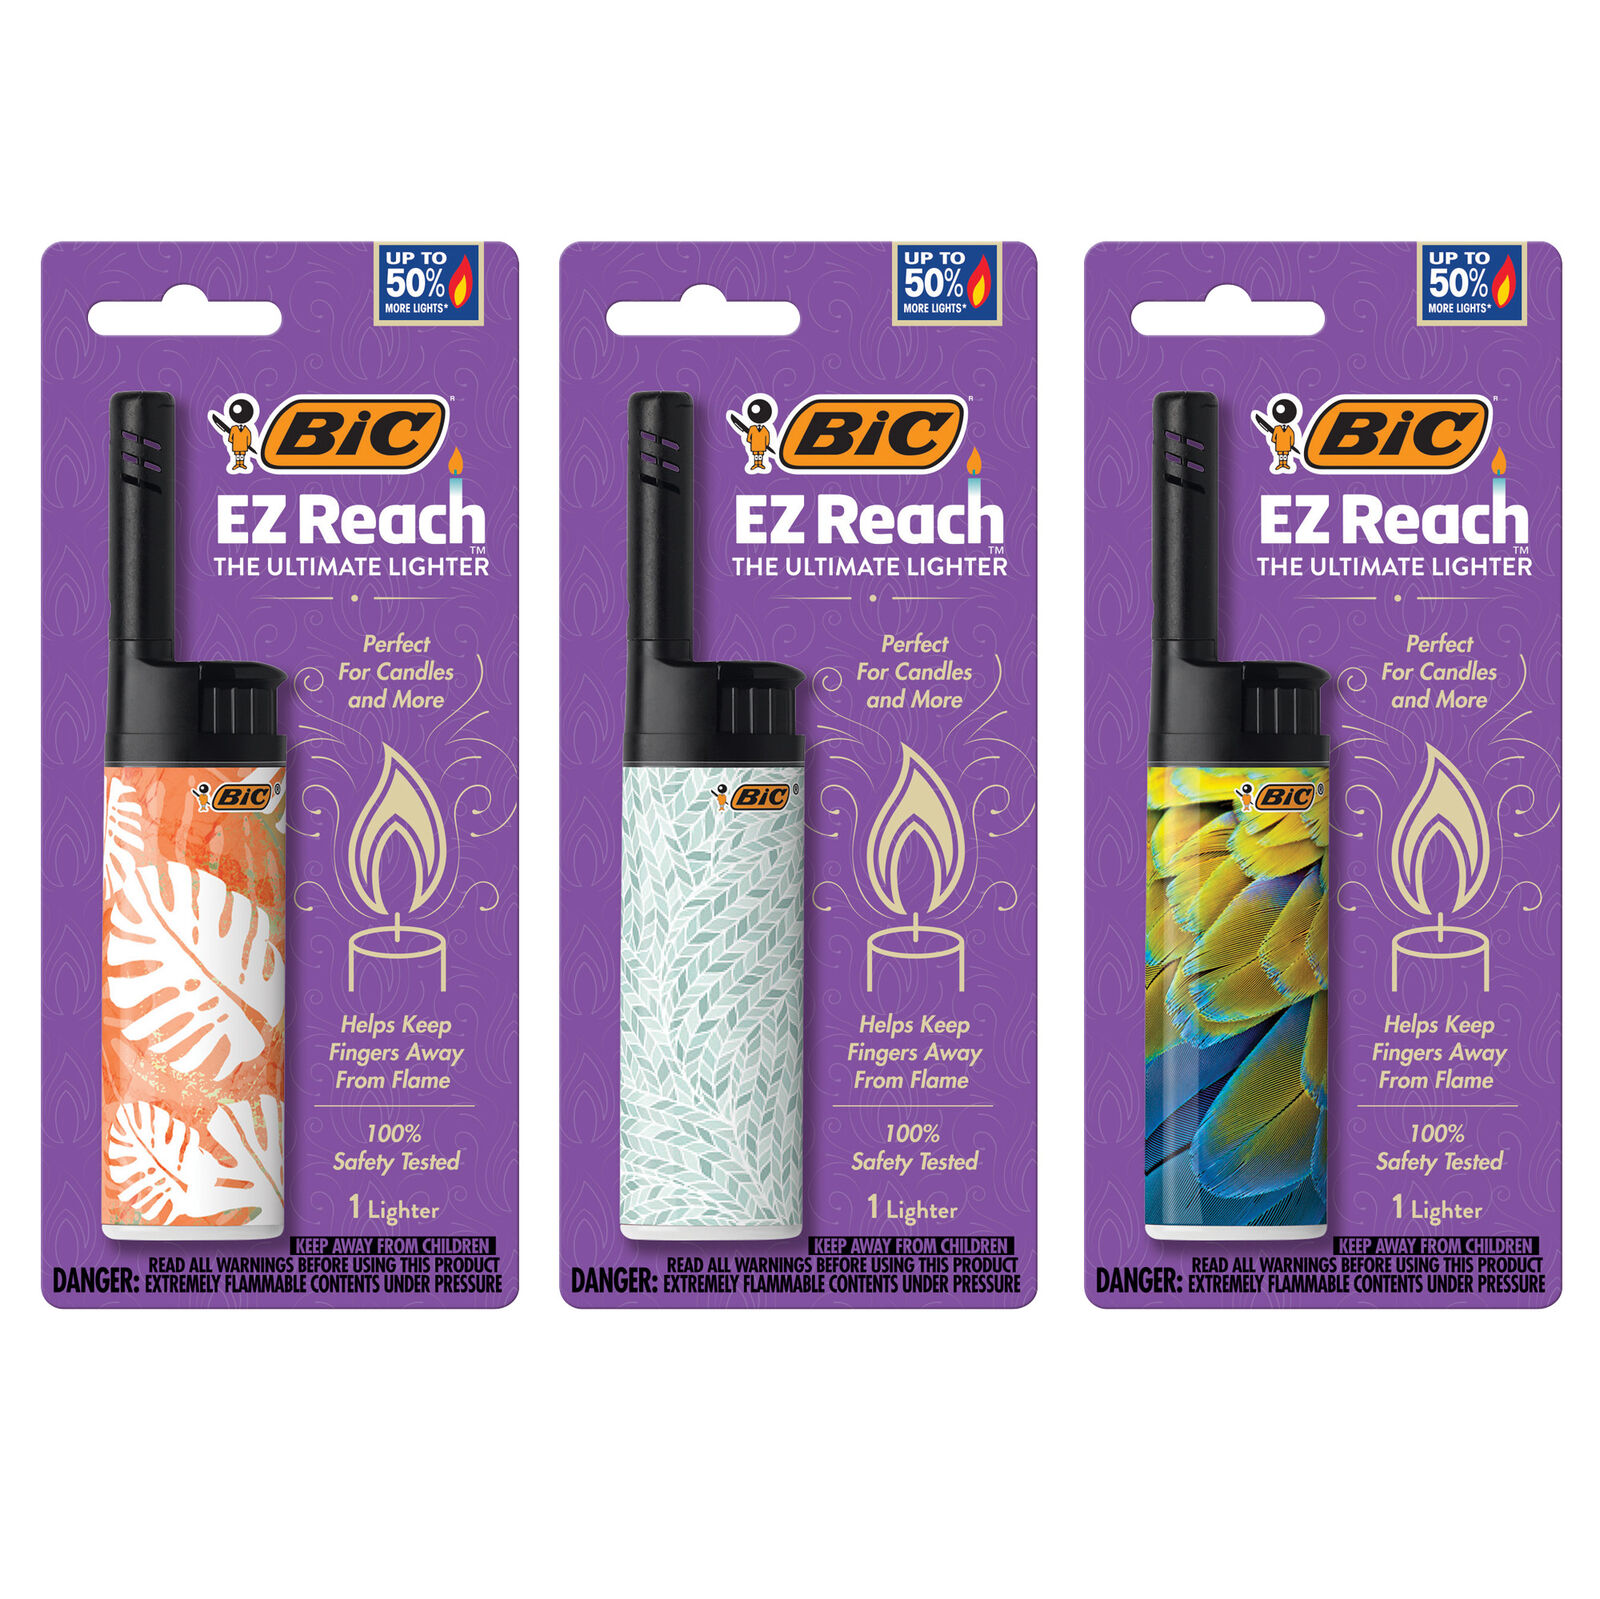 BIC EZ Reach Lighter, Home Décor Design, 3-Pack (Assortment of Designs May Vary)